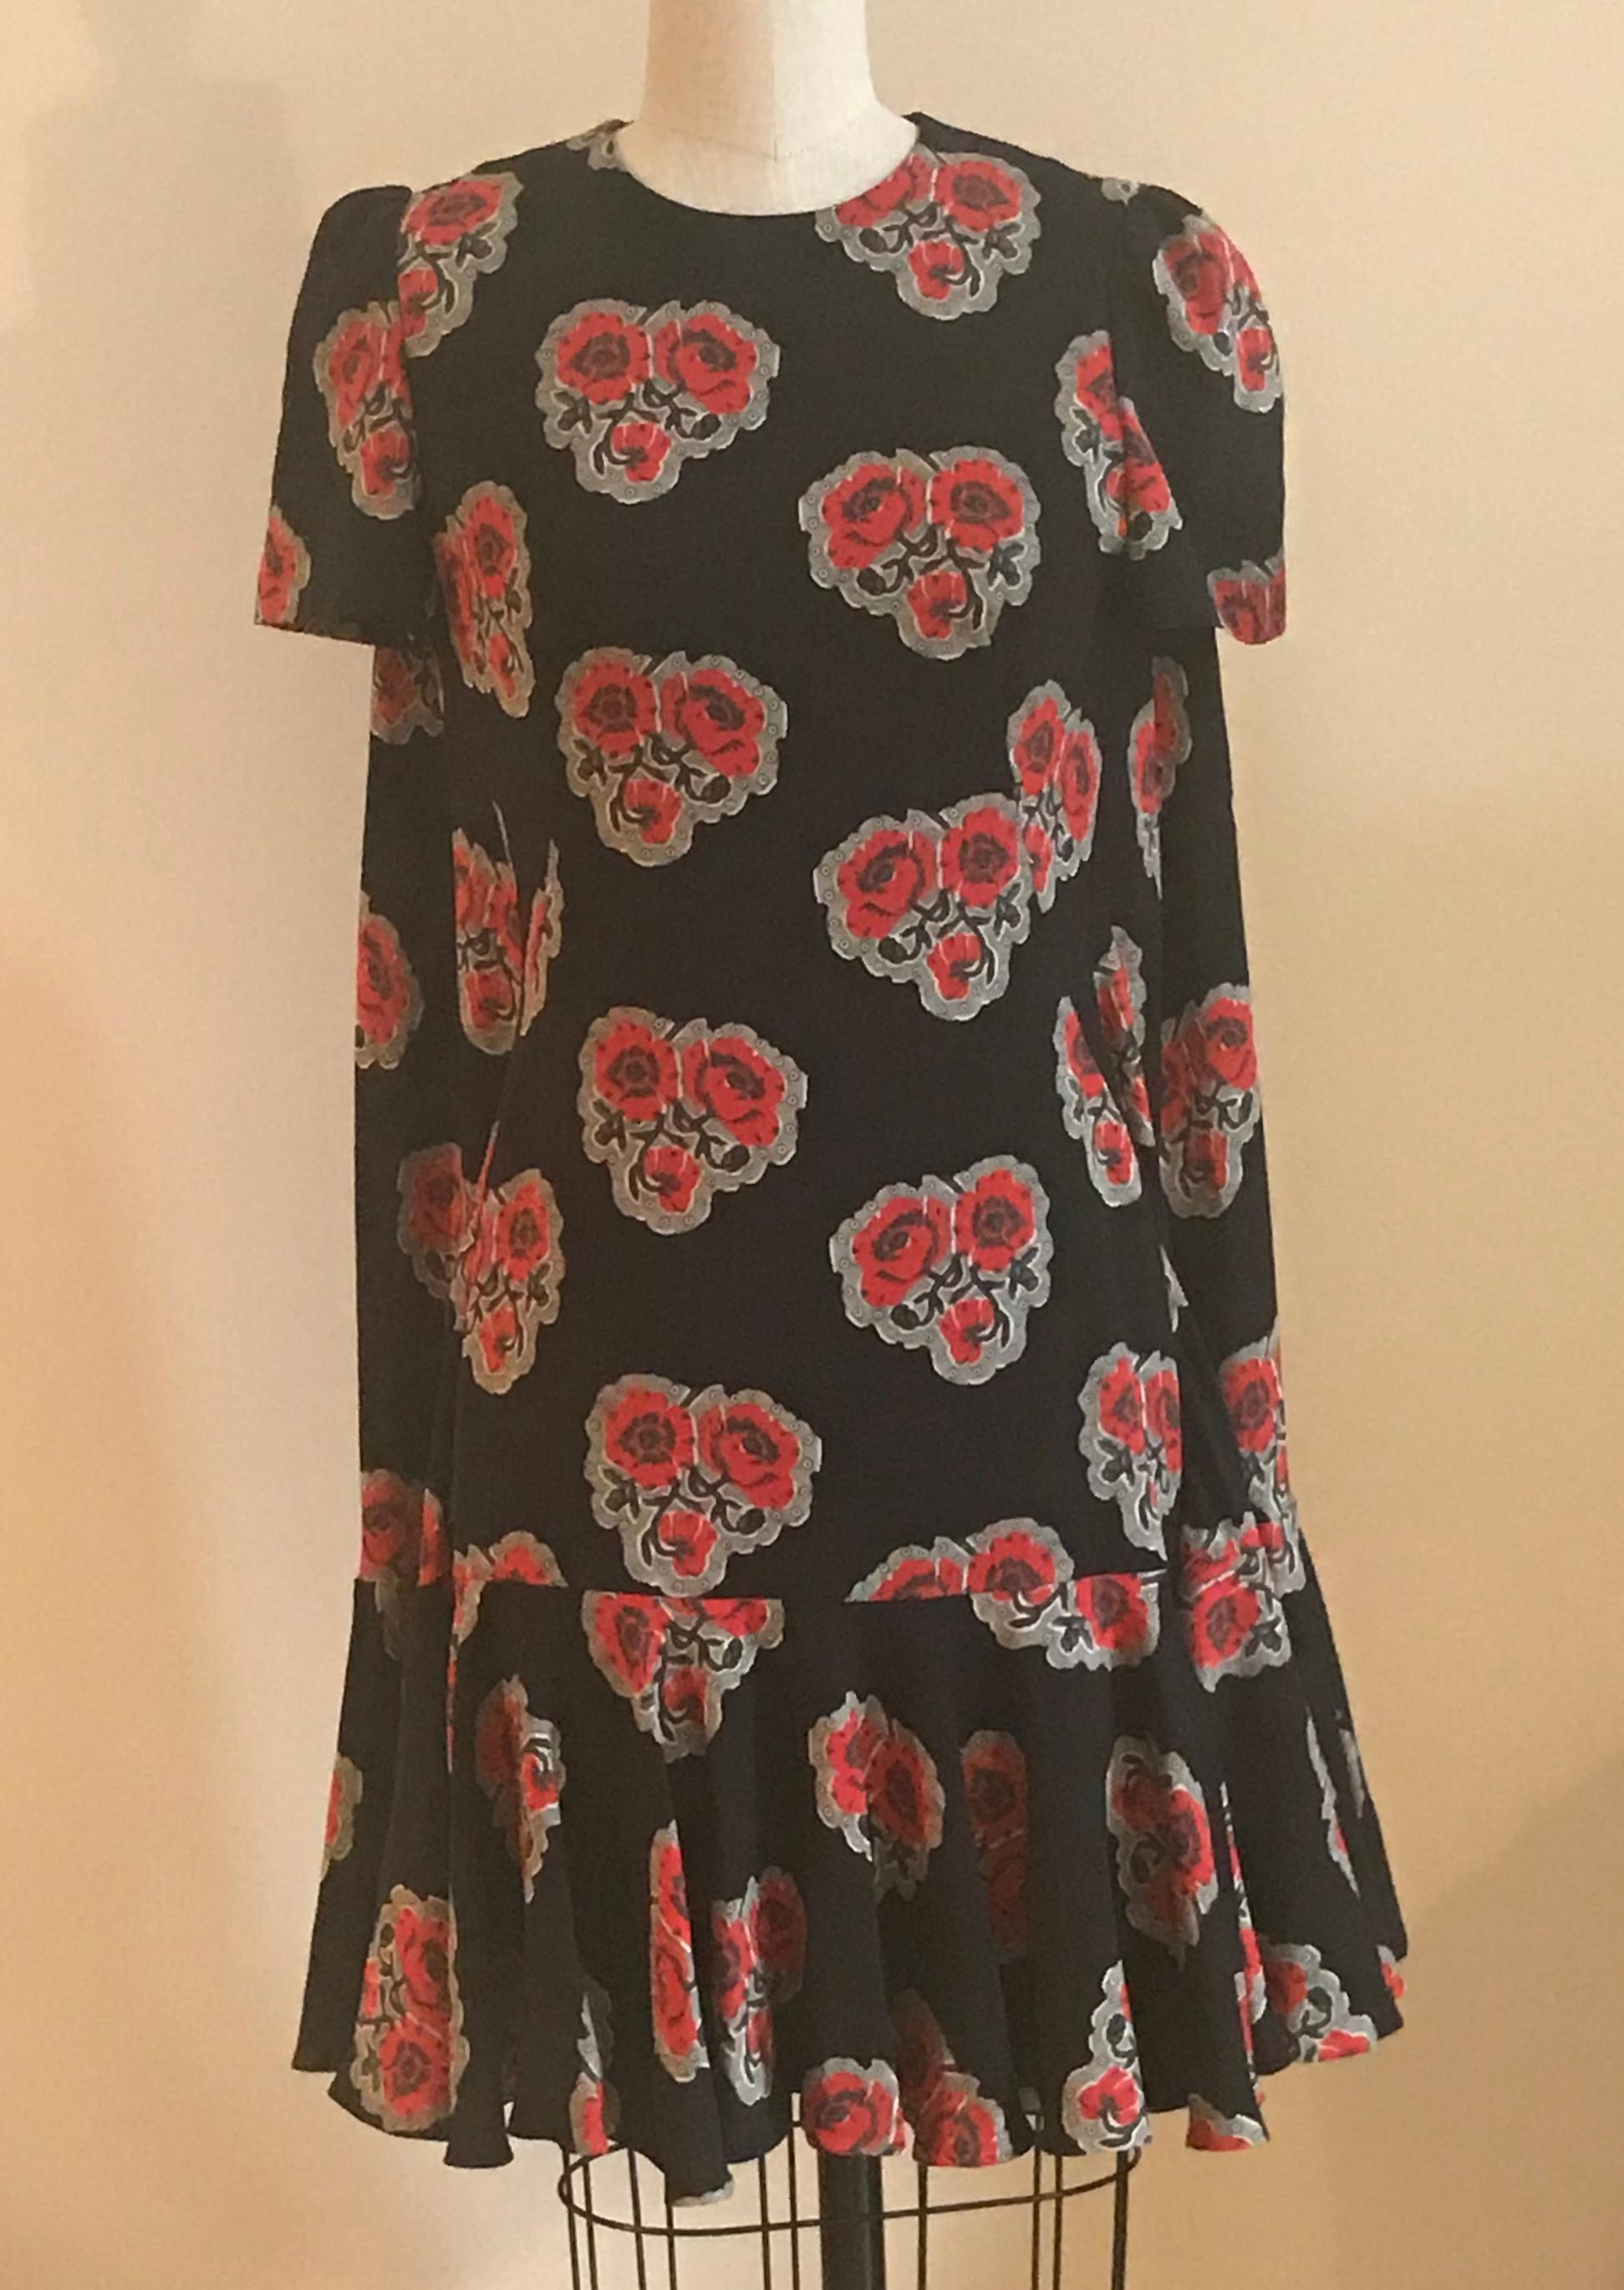 Alexander McQueen black silk crepe dress with red poppy floral print. Sweeping back cape is attached at the side seams. Short sleeve with a wide ruffle hem. Back zip is concealed by cape overlay. Two buttons at back neck. 

Retailed at $3075.

100%